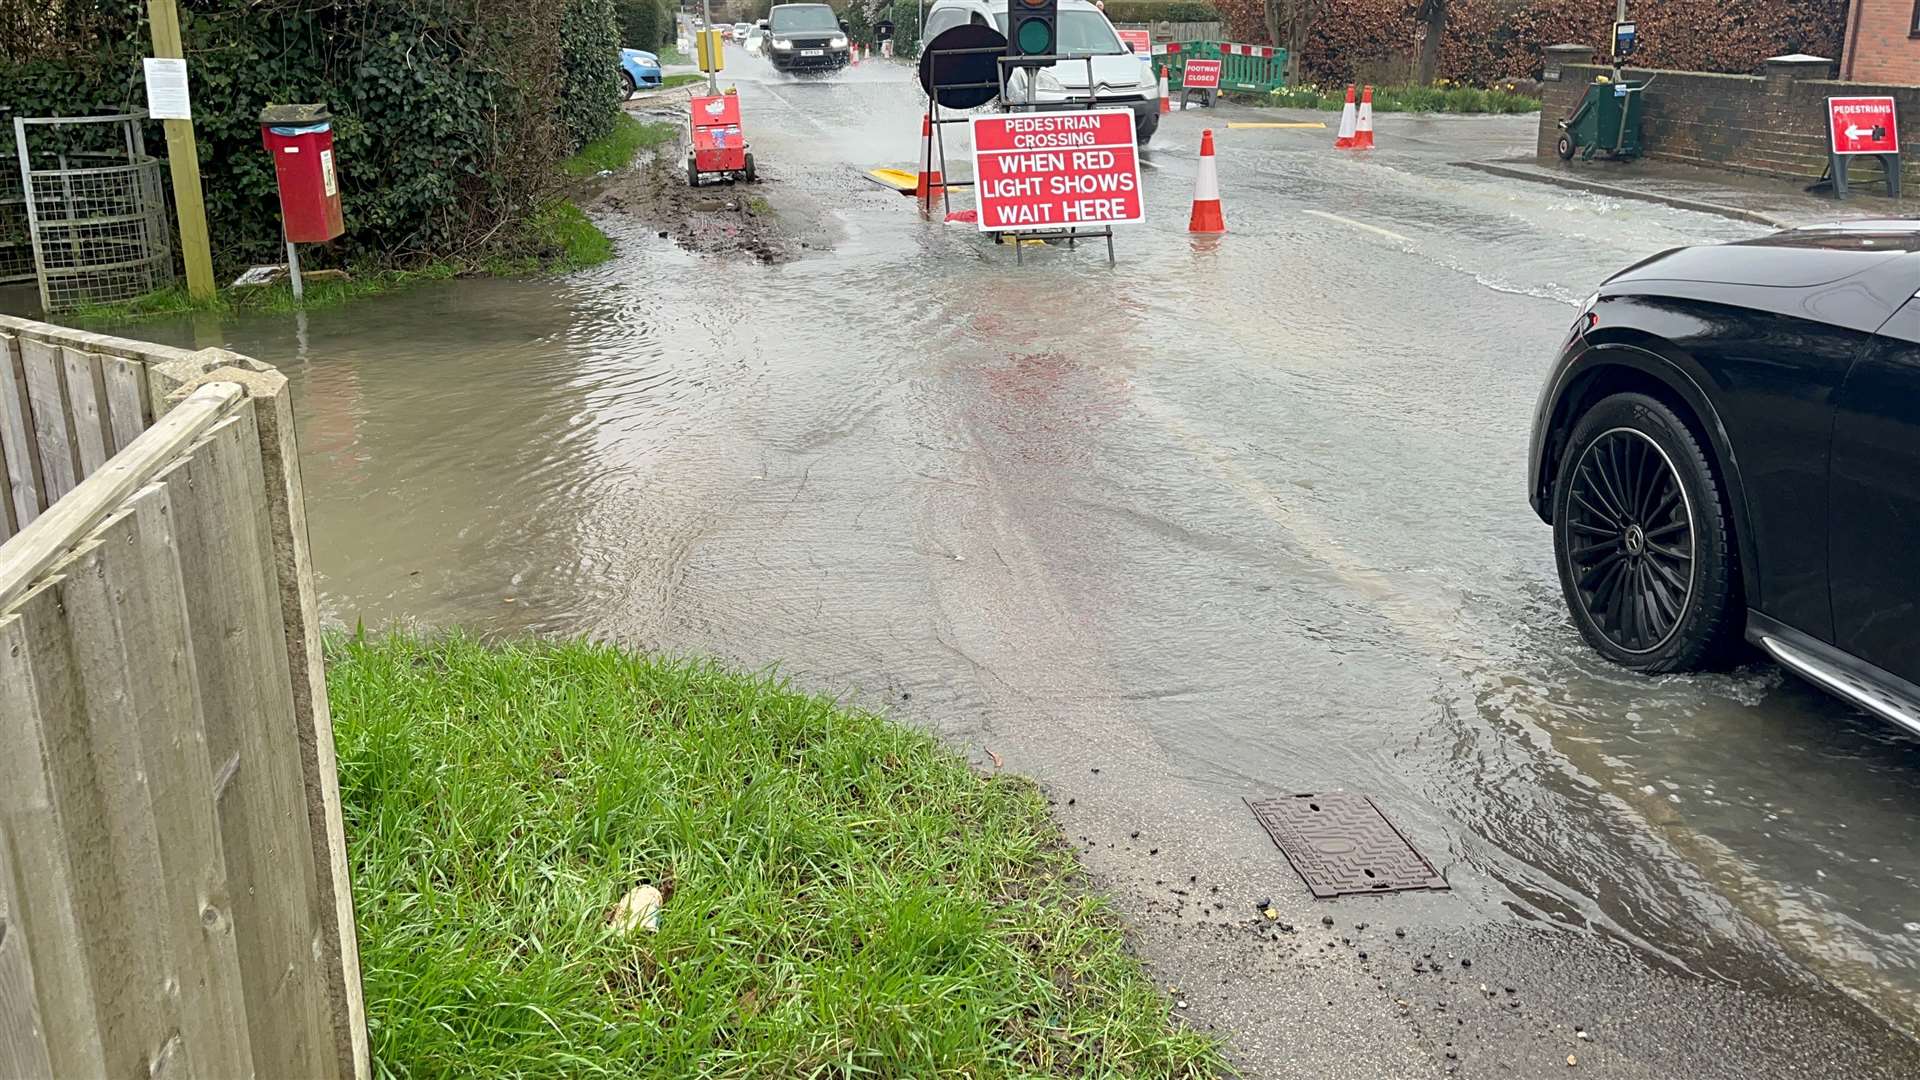 There are two-way traffic lights set up in Ashford Road with cars having to drive slowly through the deep water